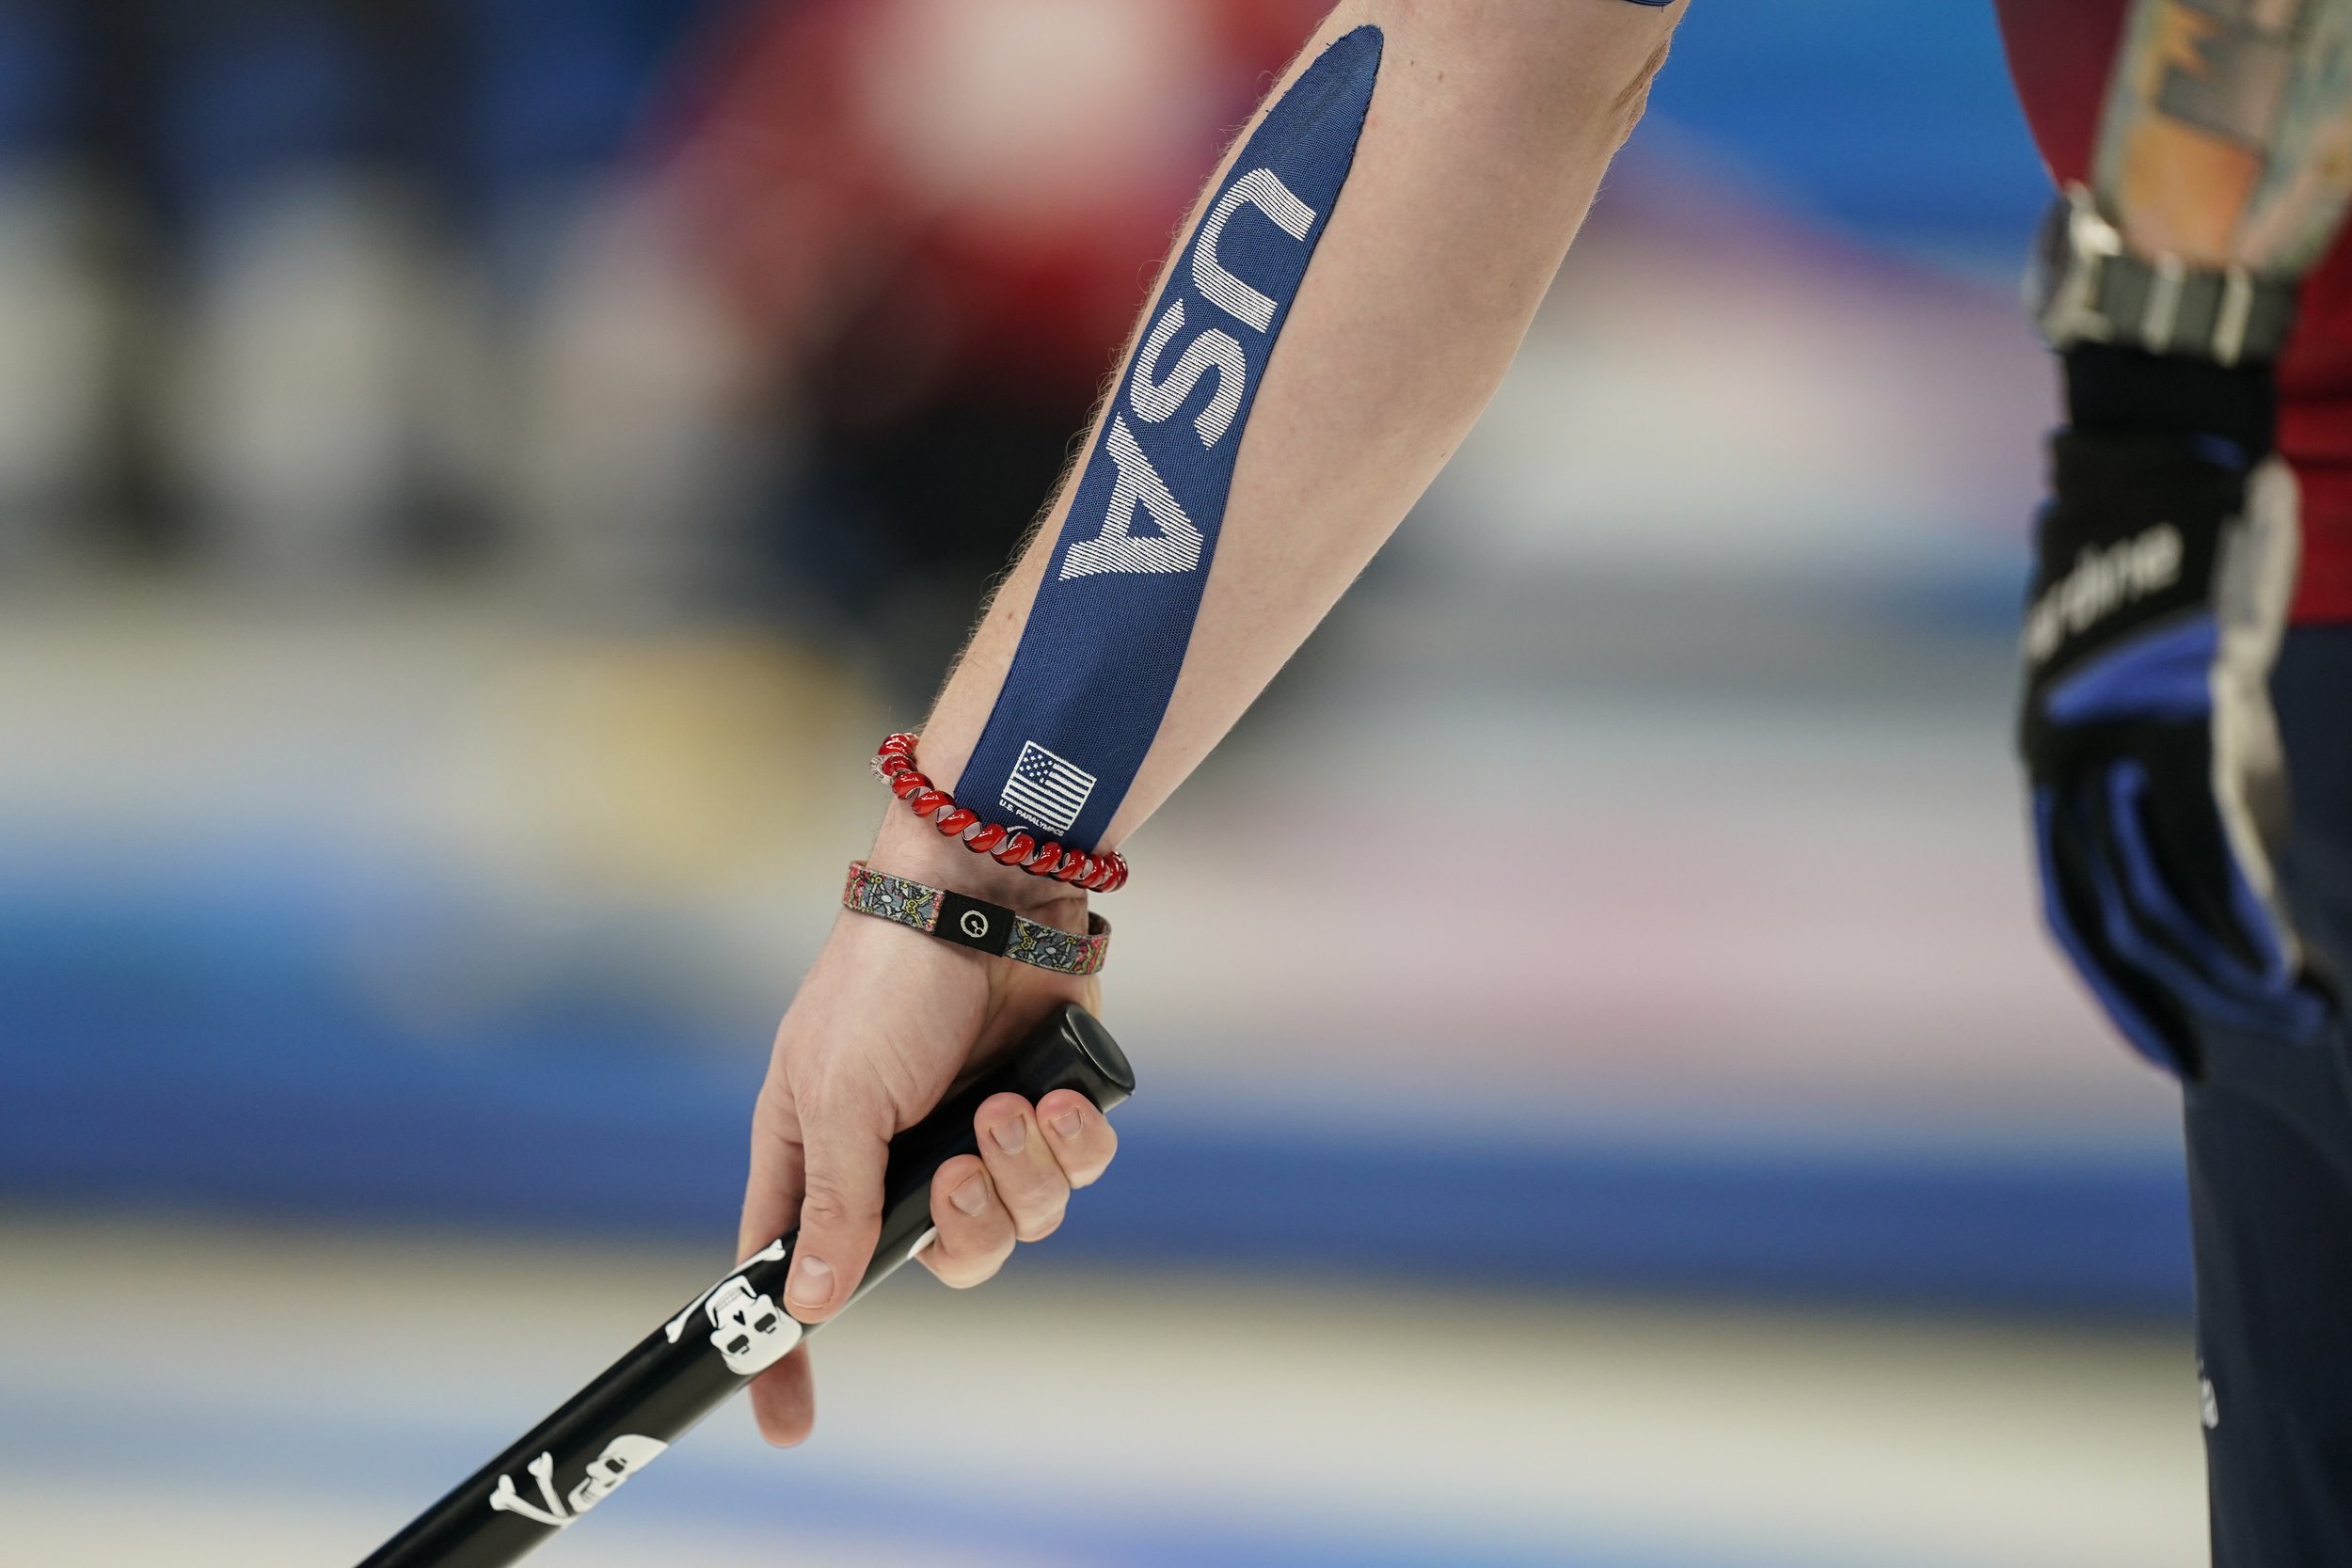  United States' Matt Hamilton lines up a throw during a men's curling match against Norway at the Beijing Winter Olympics Saturday, Feb. 12, 2022, in Beijing. (AP Photo/Brynn Anderson) 